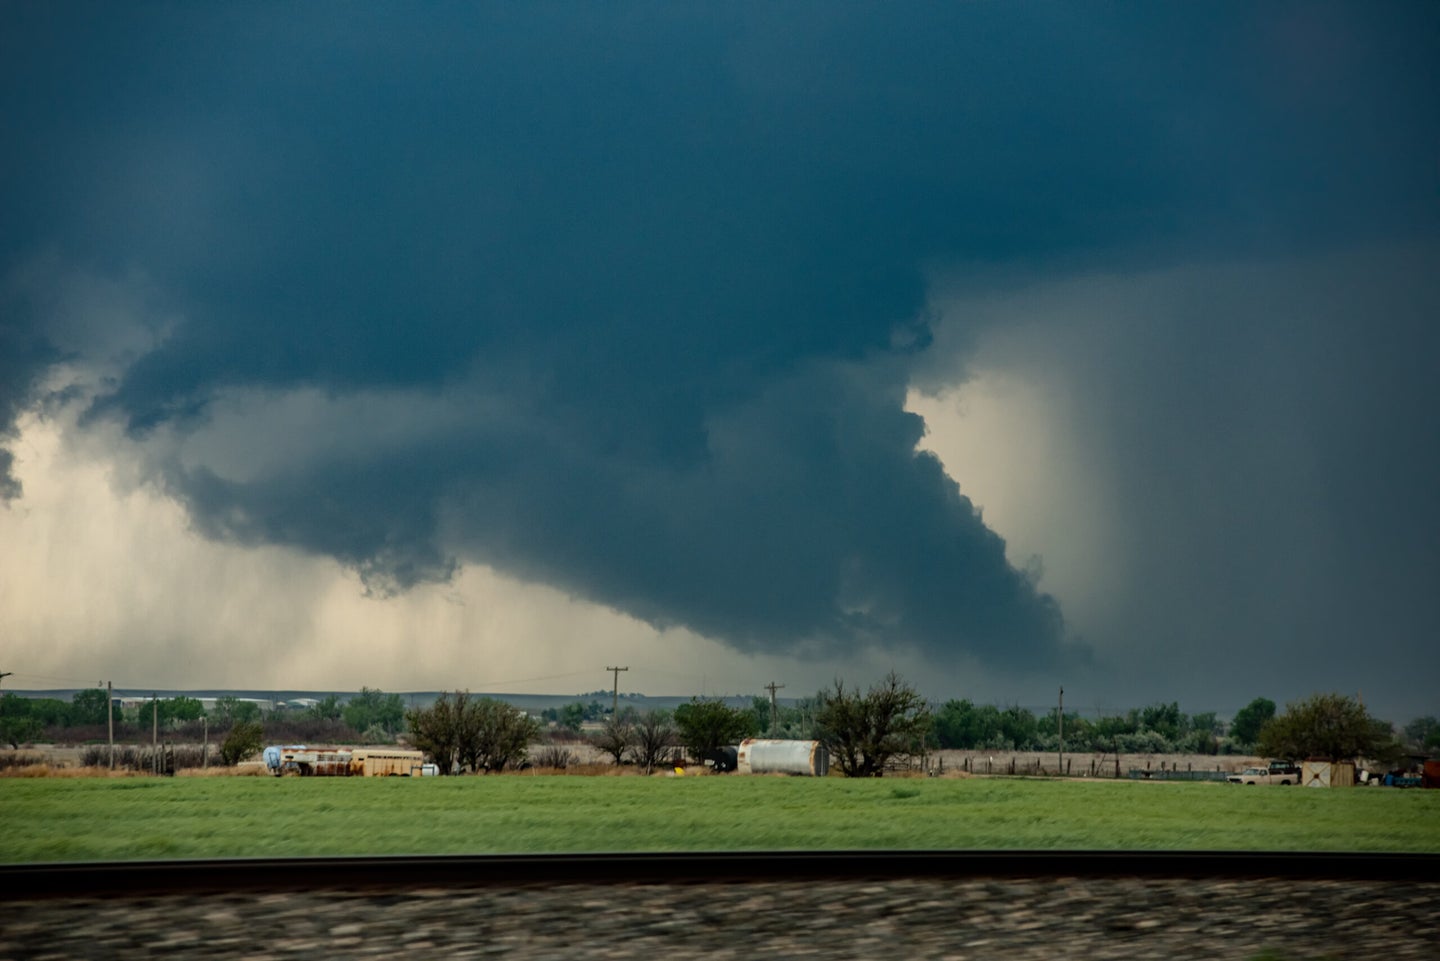 A giant tornado moves fast along a highway towards a town miles ahead